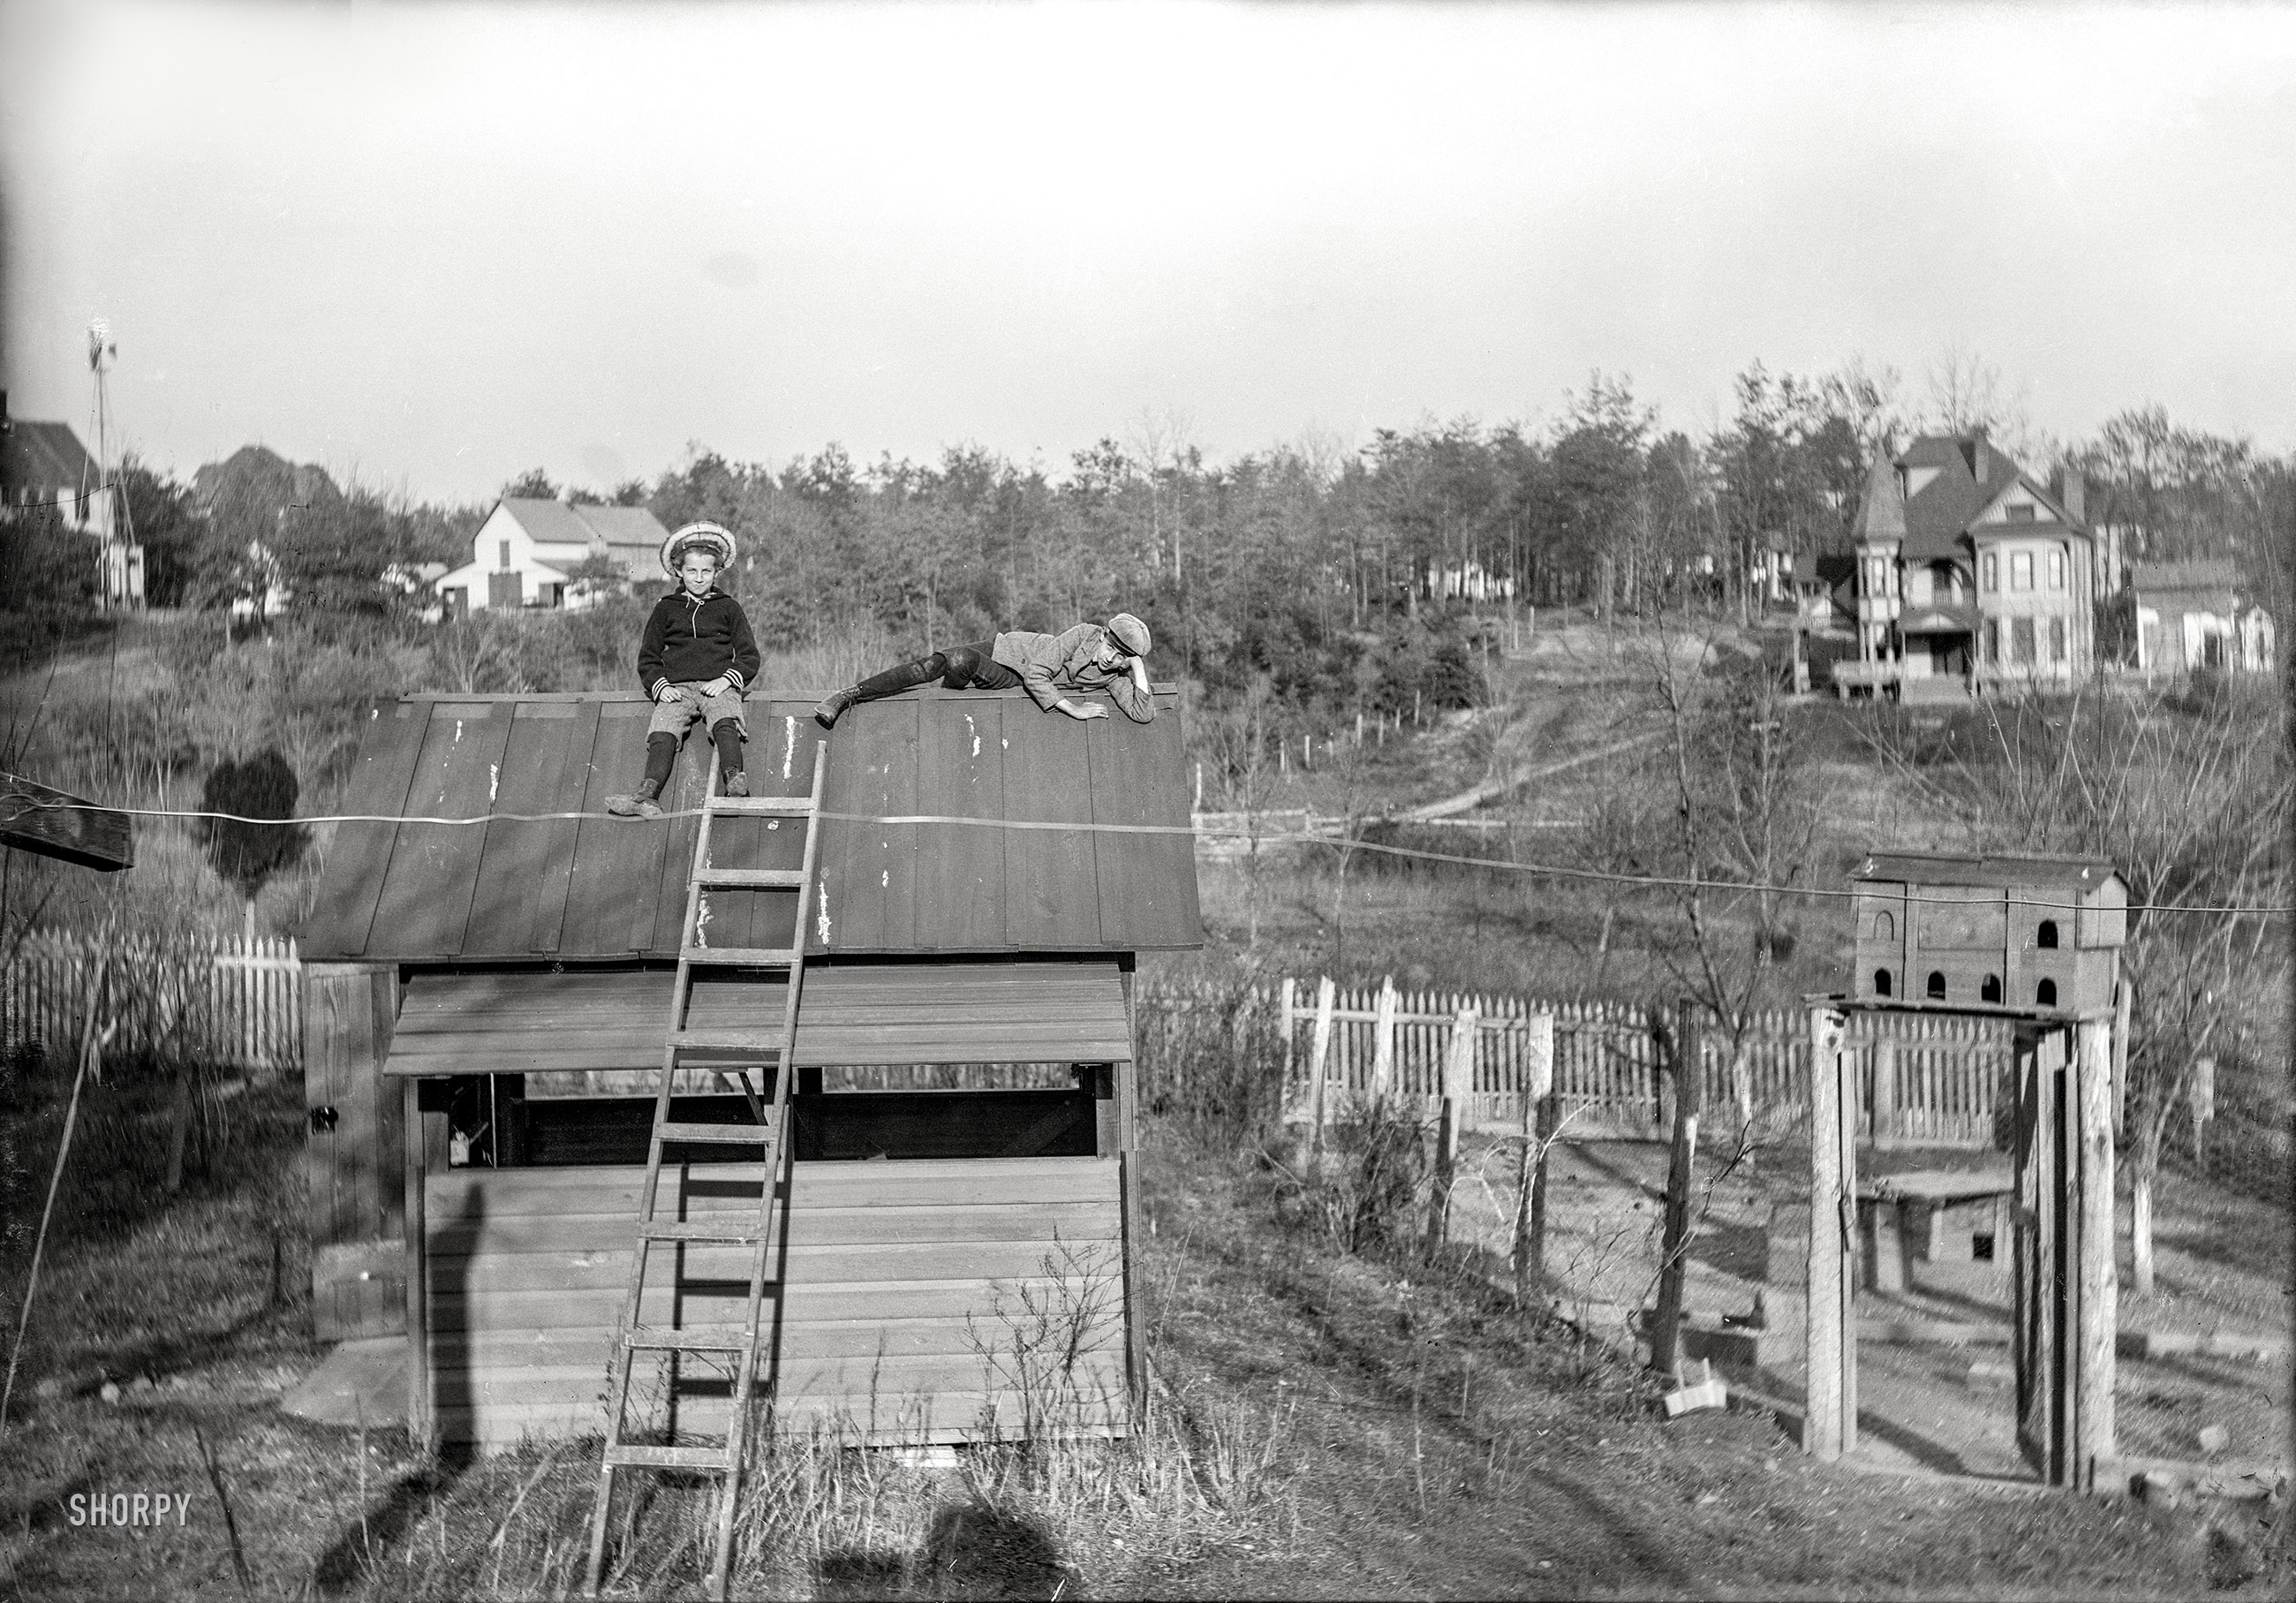 Continuing our visit to Takoma Park, Maryland, circa 1895, we find Helen and Willard Douglas taking their ease Snoopy-style at the family compound, which seems to be equipped with accommodations for poultry as well as laundry. 5x7 glass negative by Edward M. Douglas. View full size.